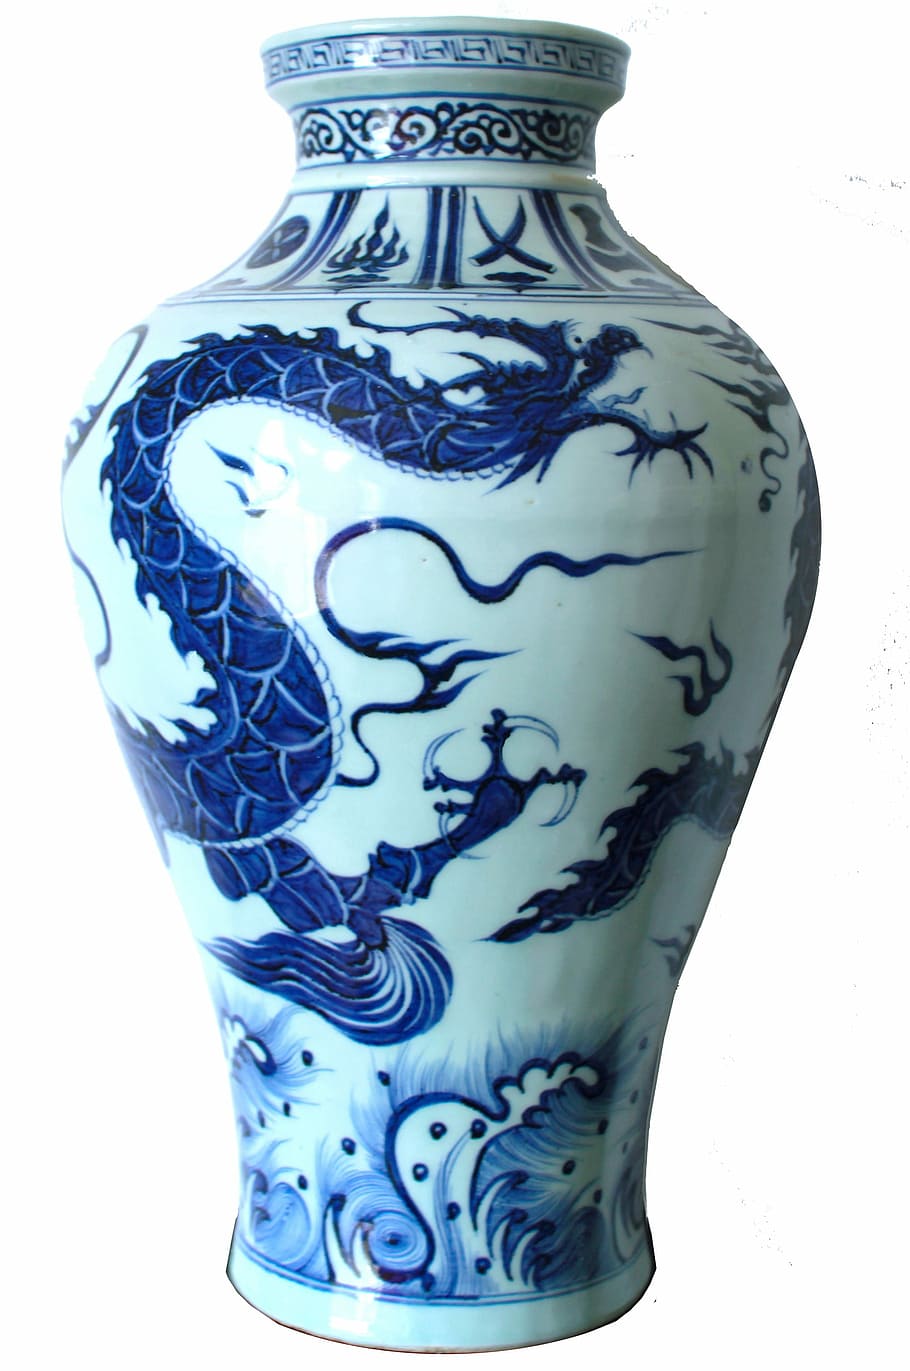 white, blue, floral, graphic, ceramic, Dragon, Vase, Antique, Chinese, Art, chinese